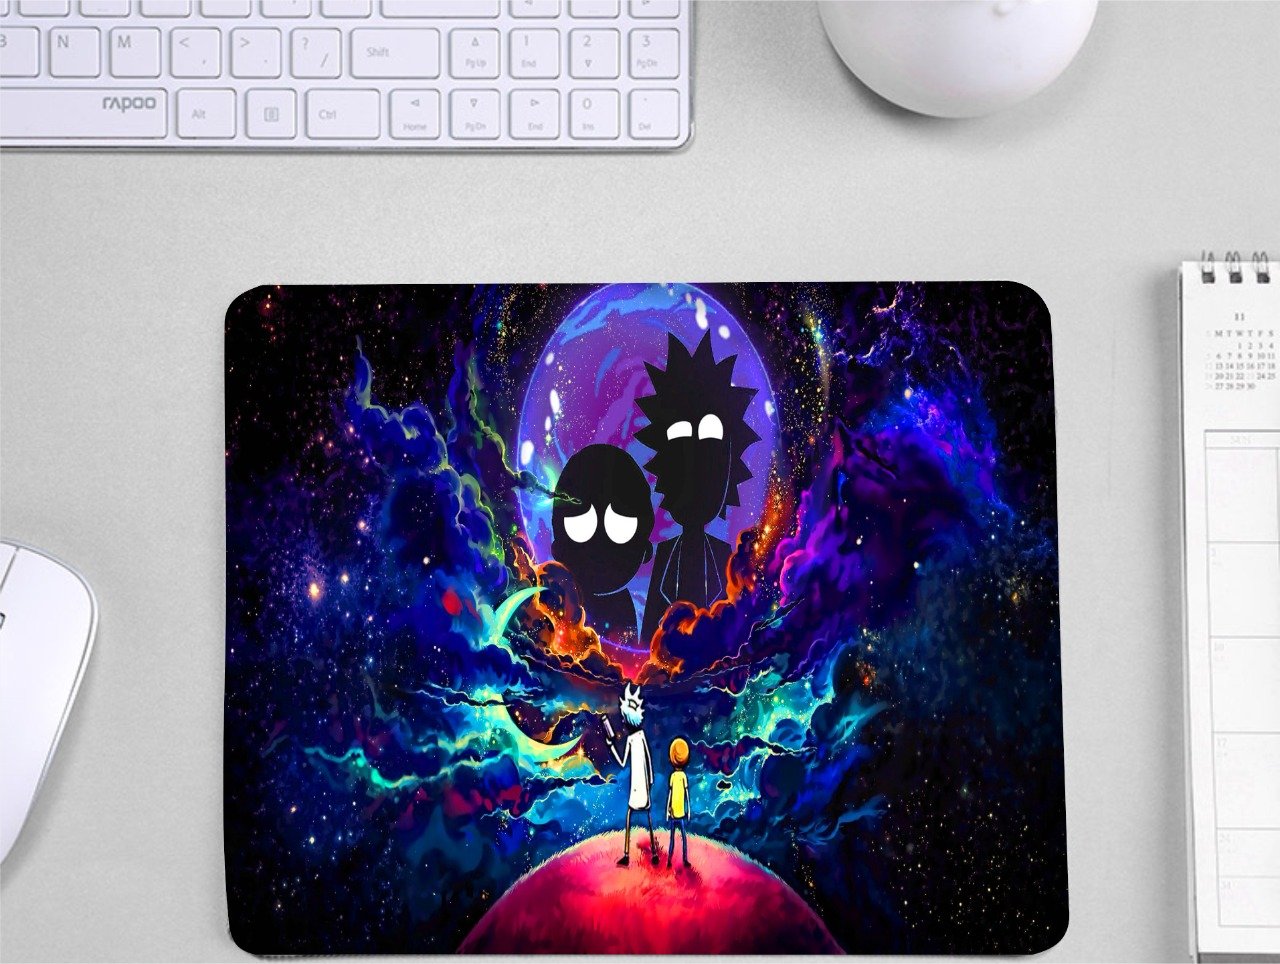 This is a Non-slip Mouse pad and a 3 mm thick mouse pad.